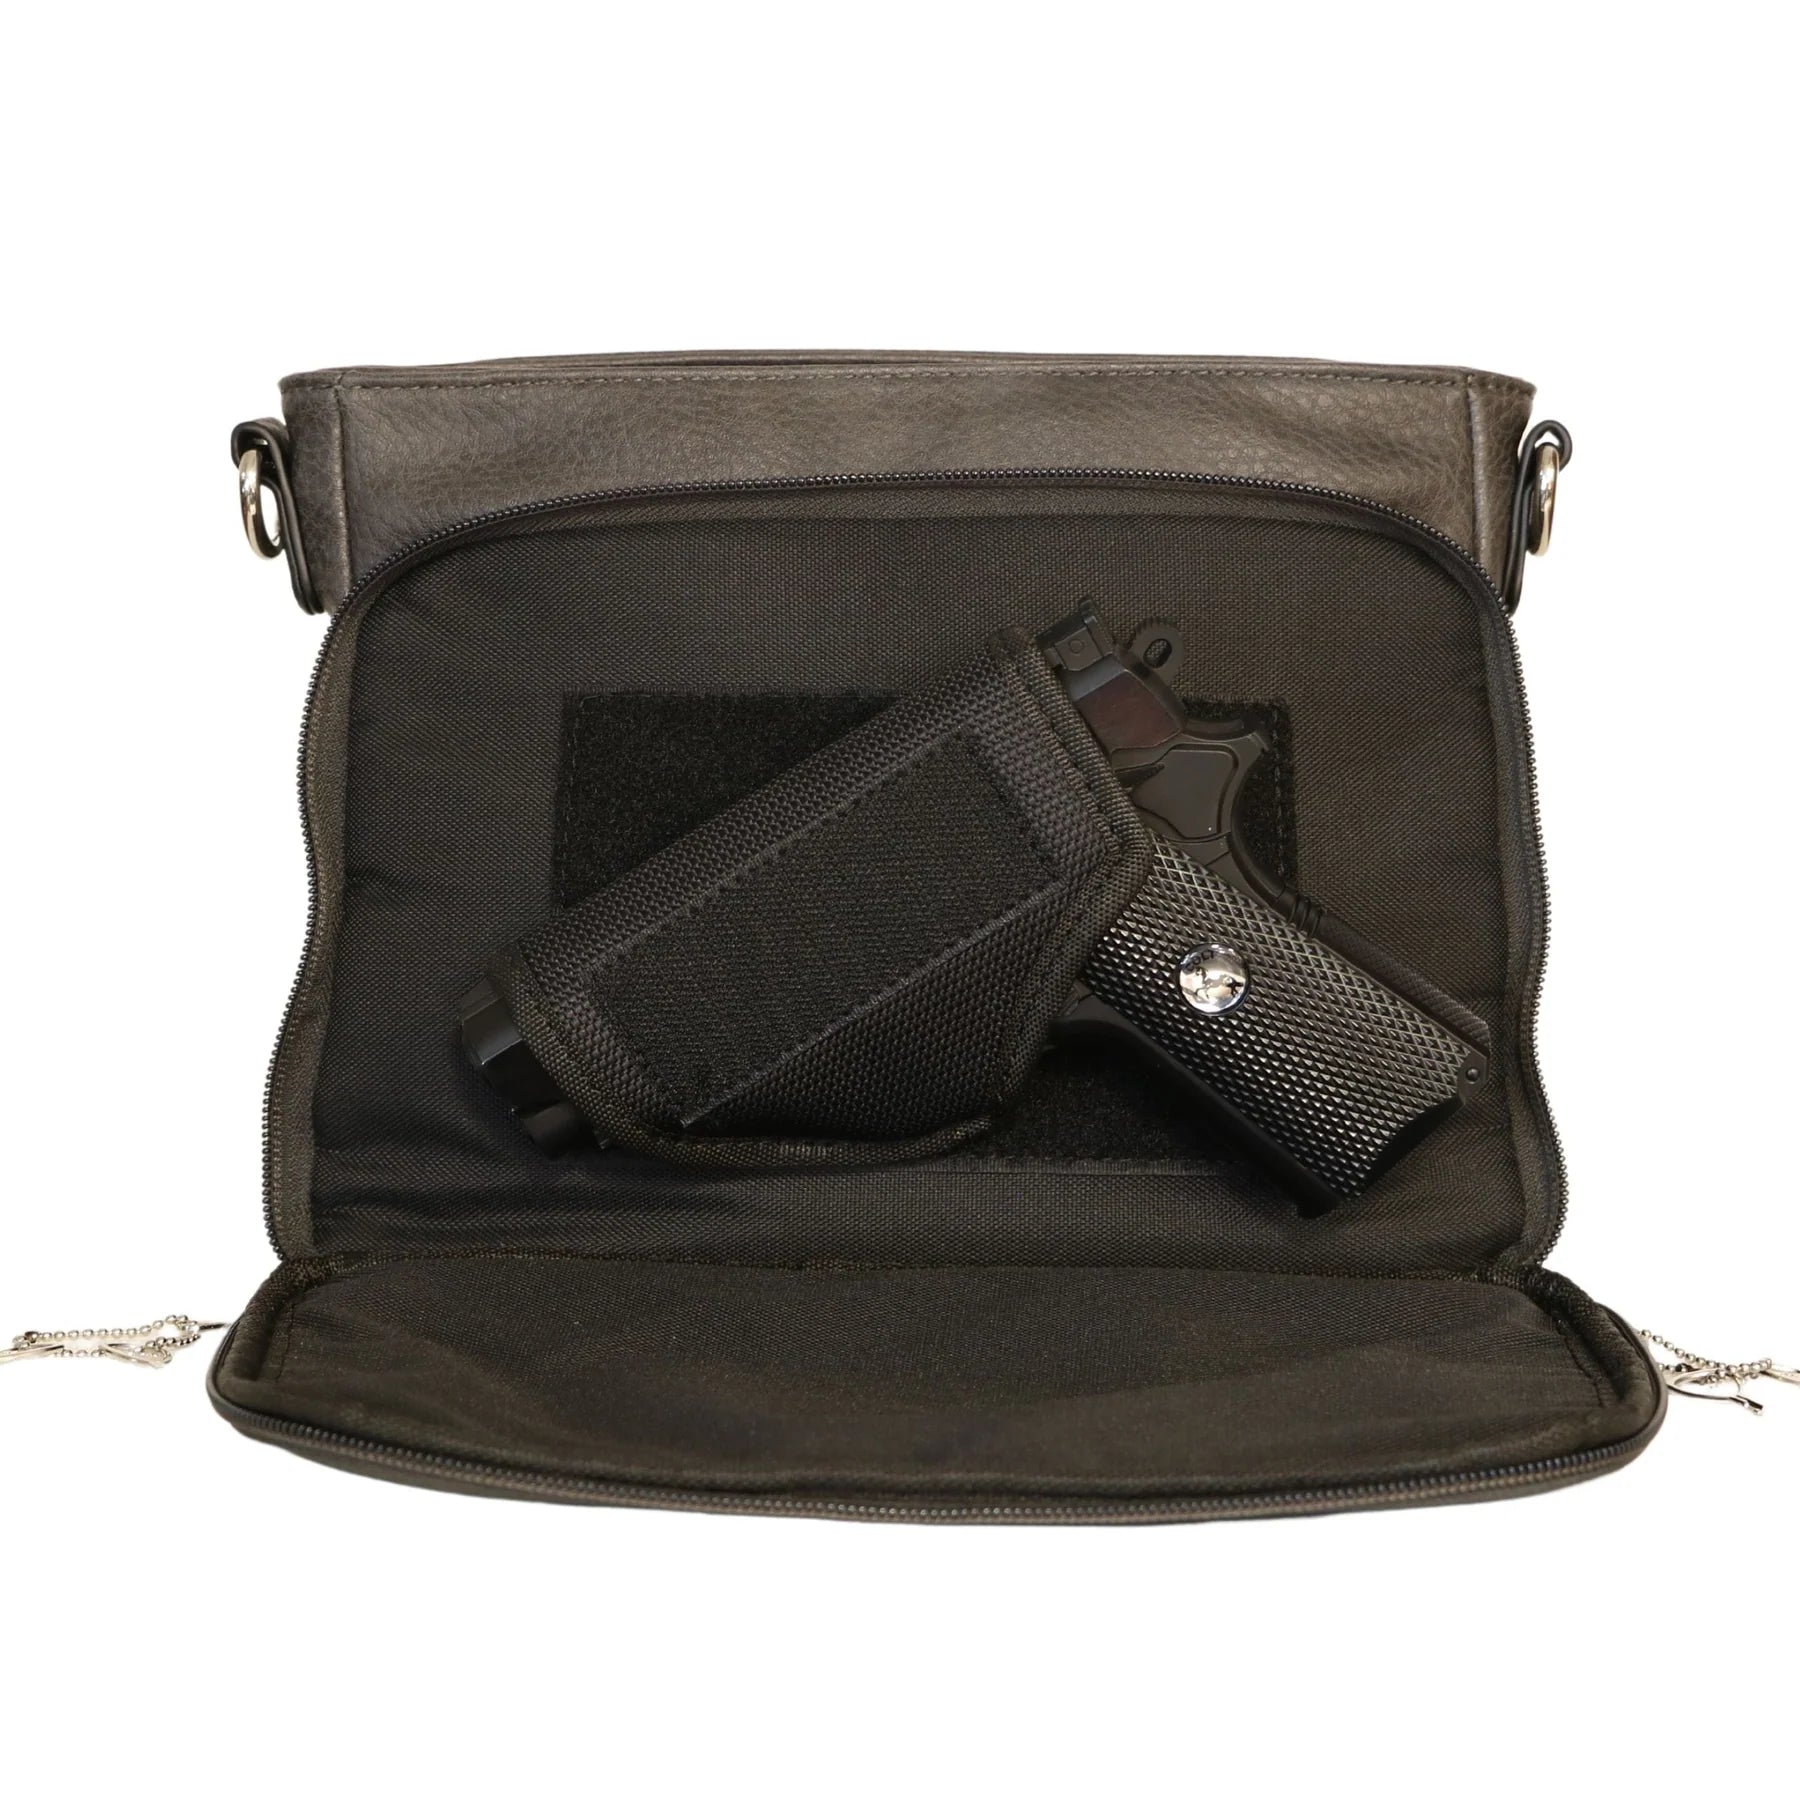 Women's Concealed Carry by Packin' Neat